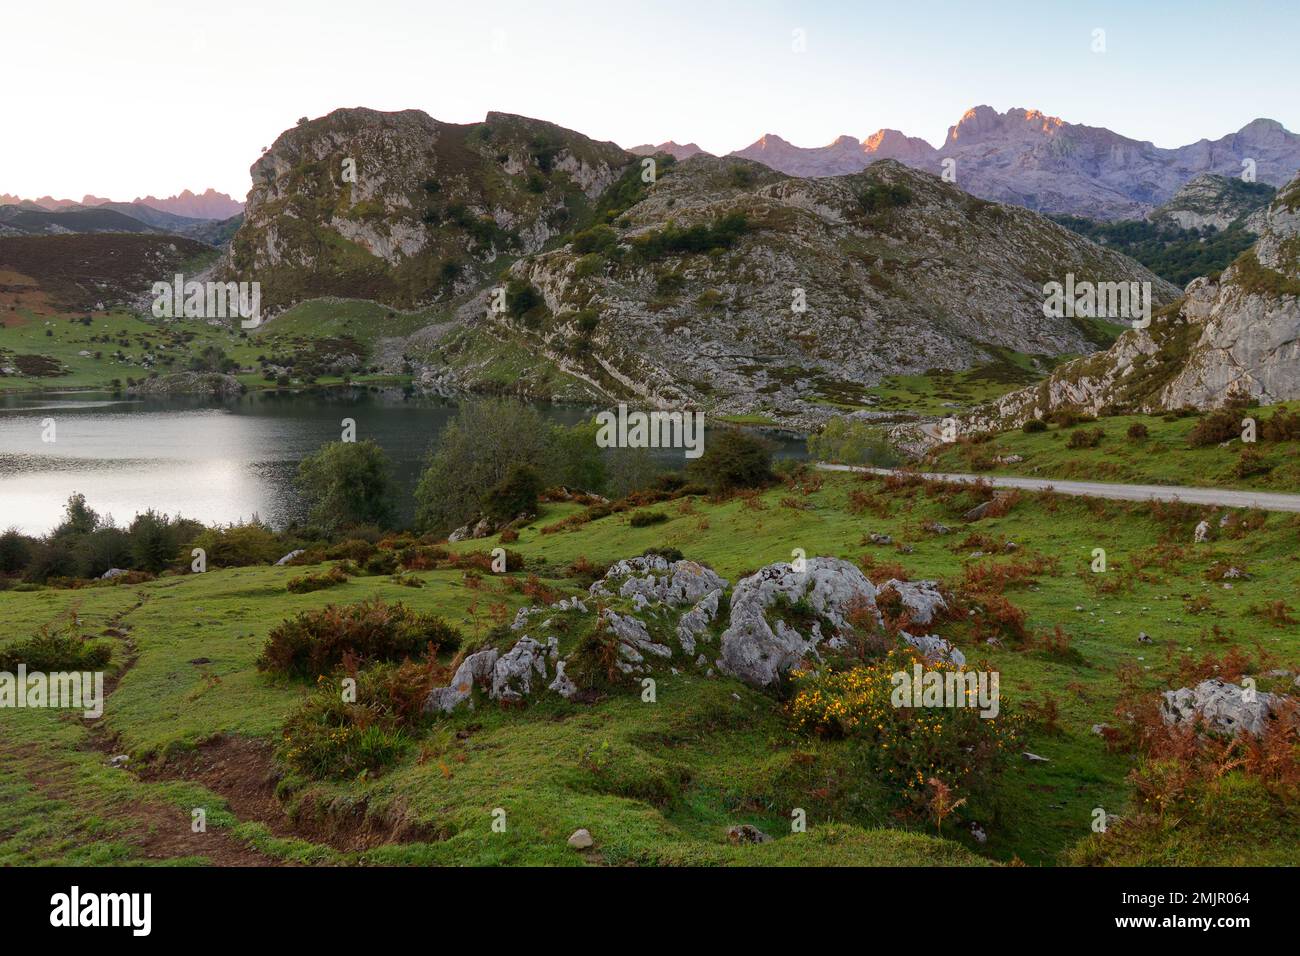 Asturias and Cantabria are well-known for their beaches, but the magic is in the mountains of the Picos de Europa Stock Photo